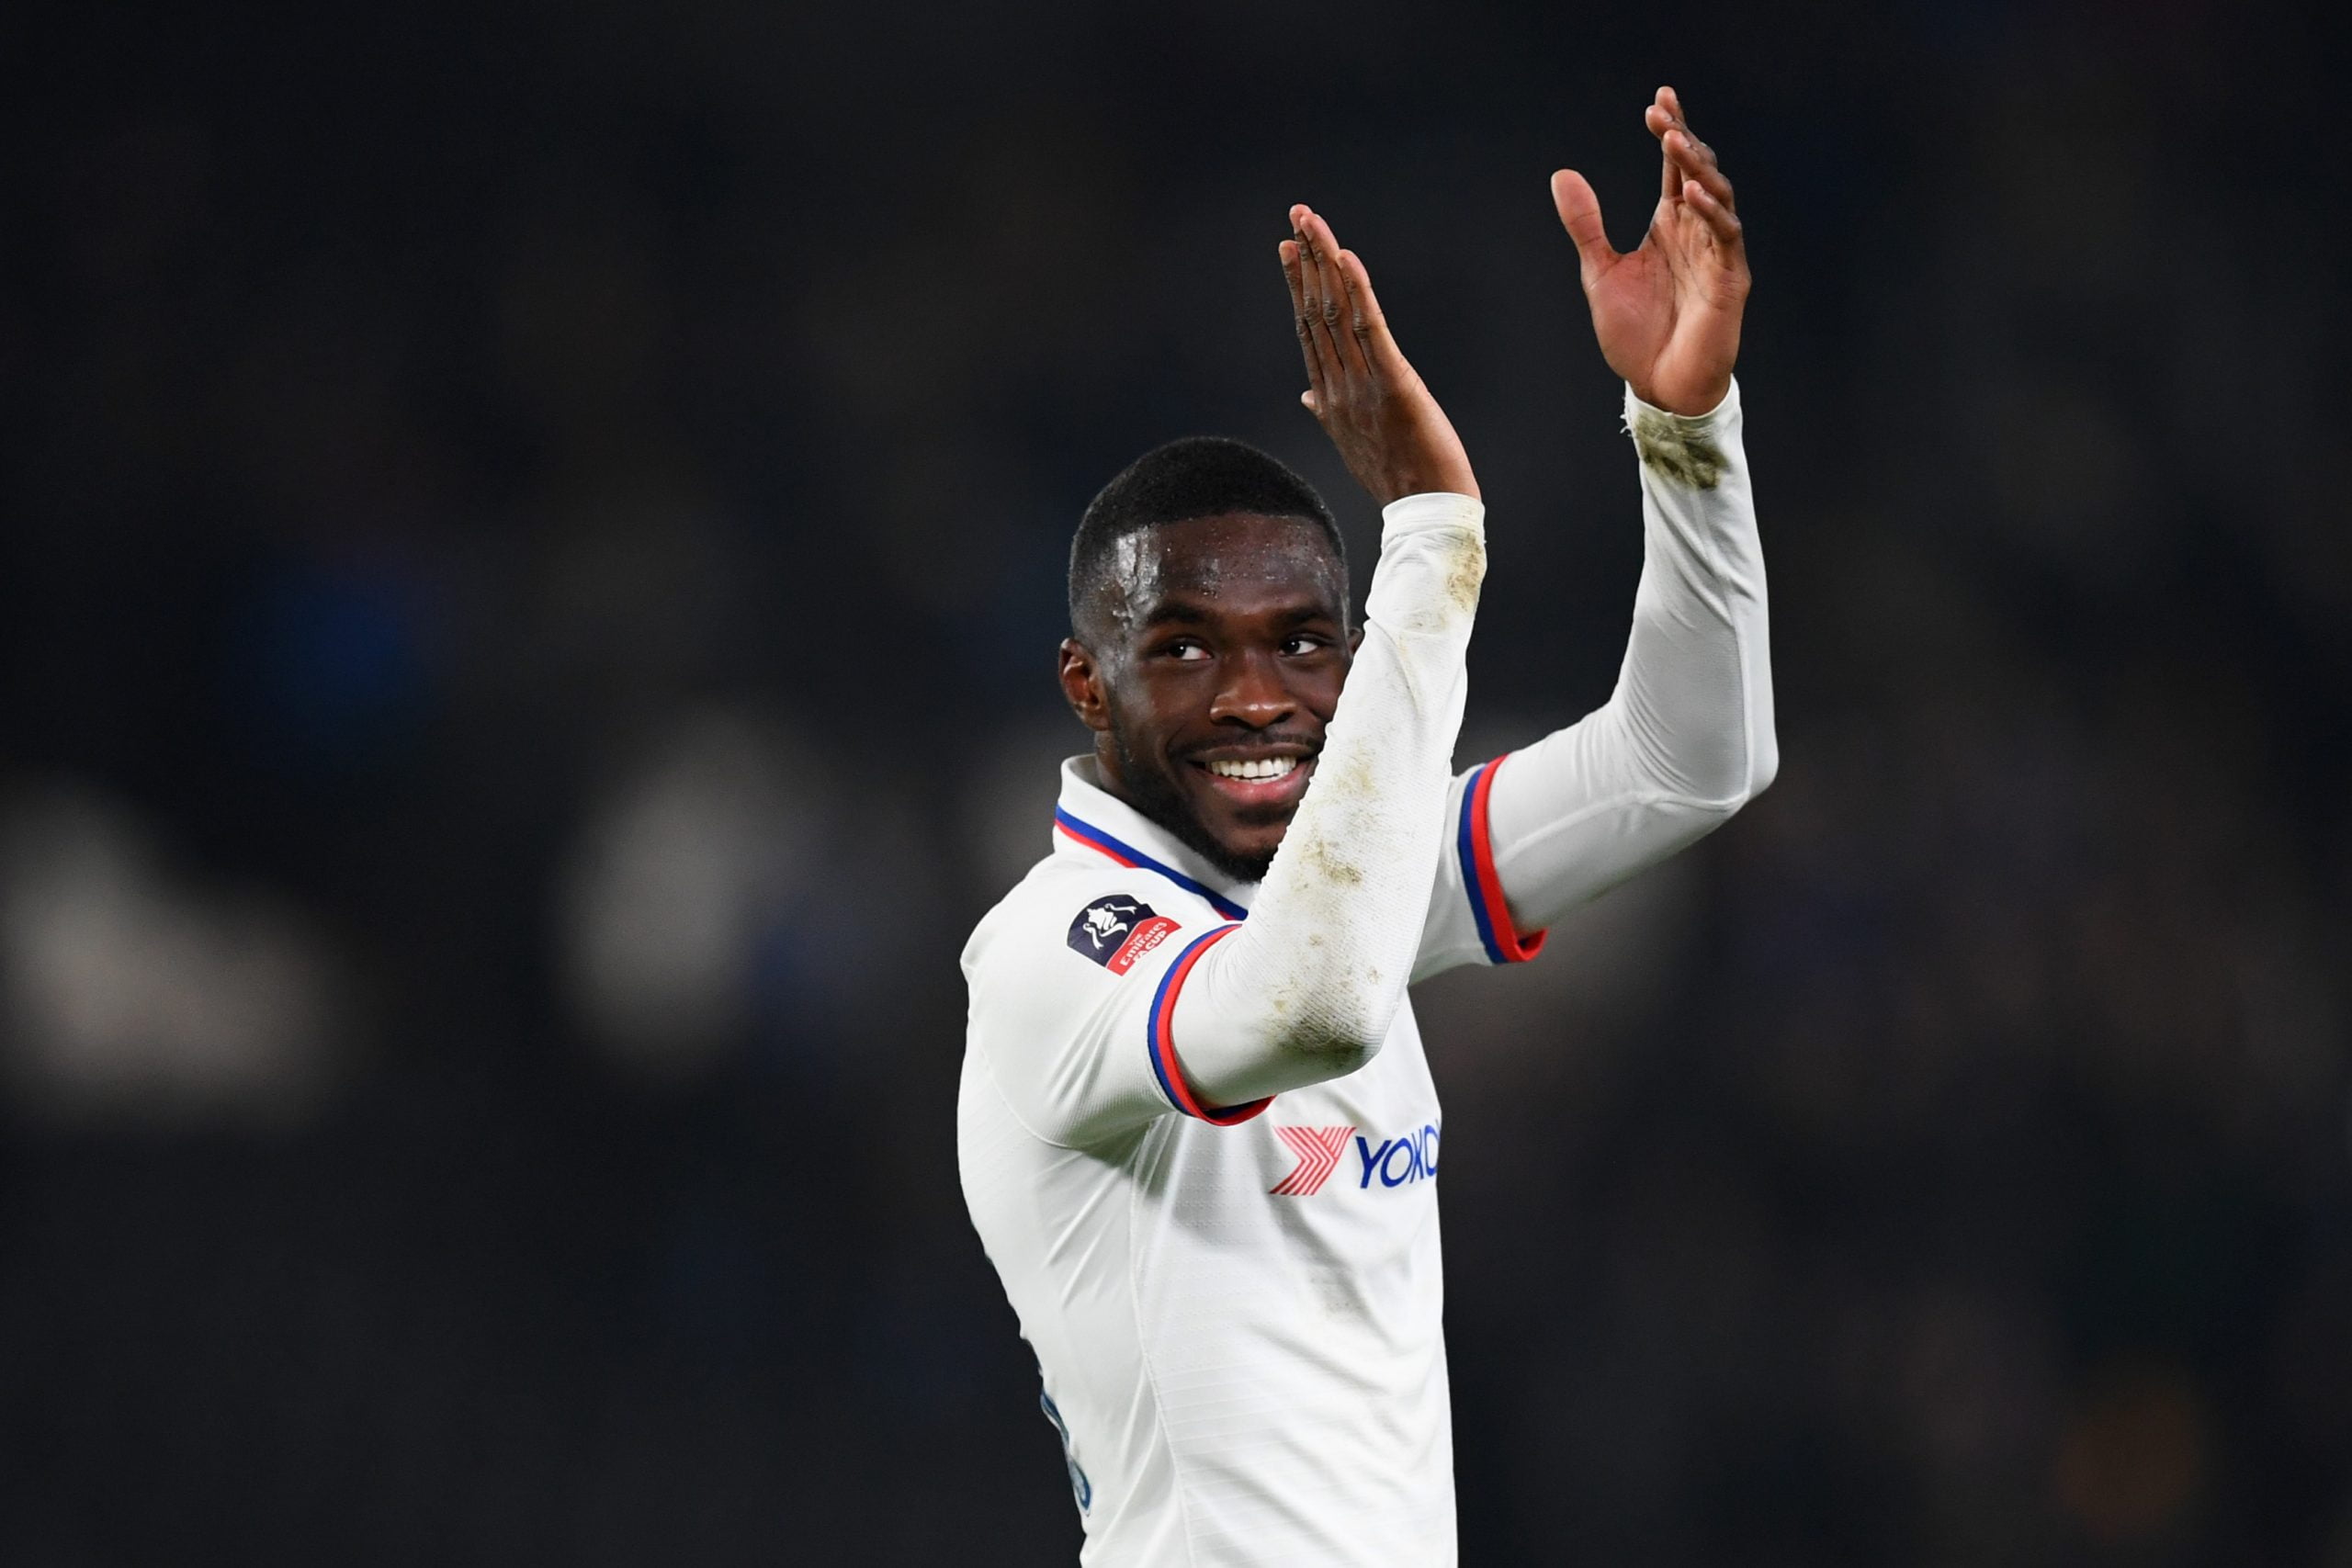 AC Milan eyeing a loan move for Chelsea's Fikayo Tomori who is seen in the picture